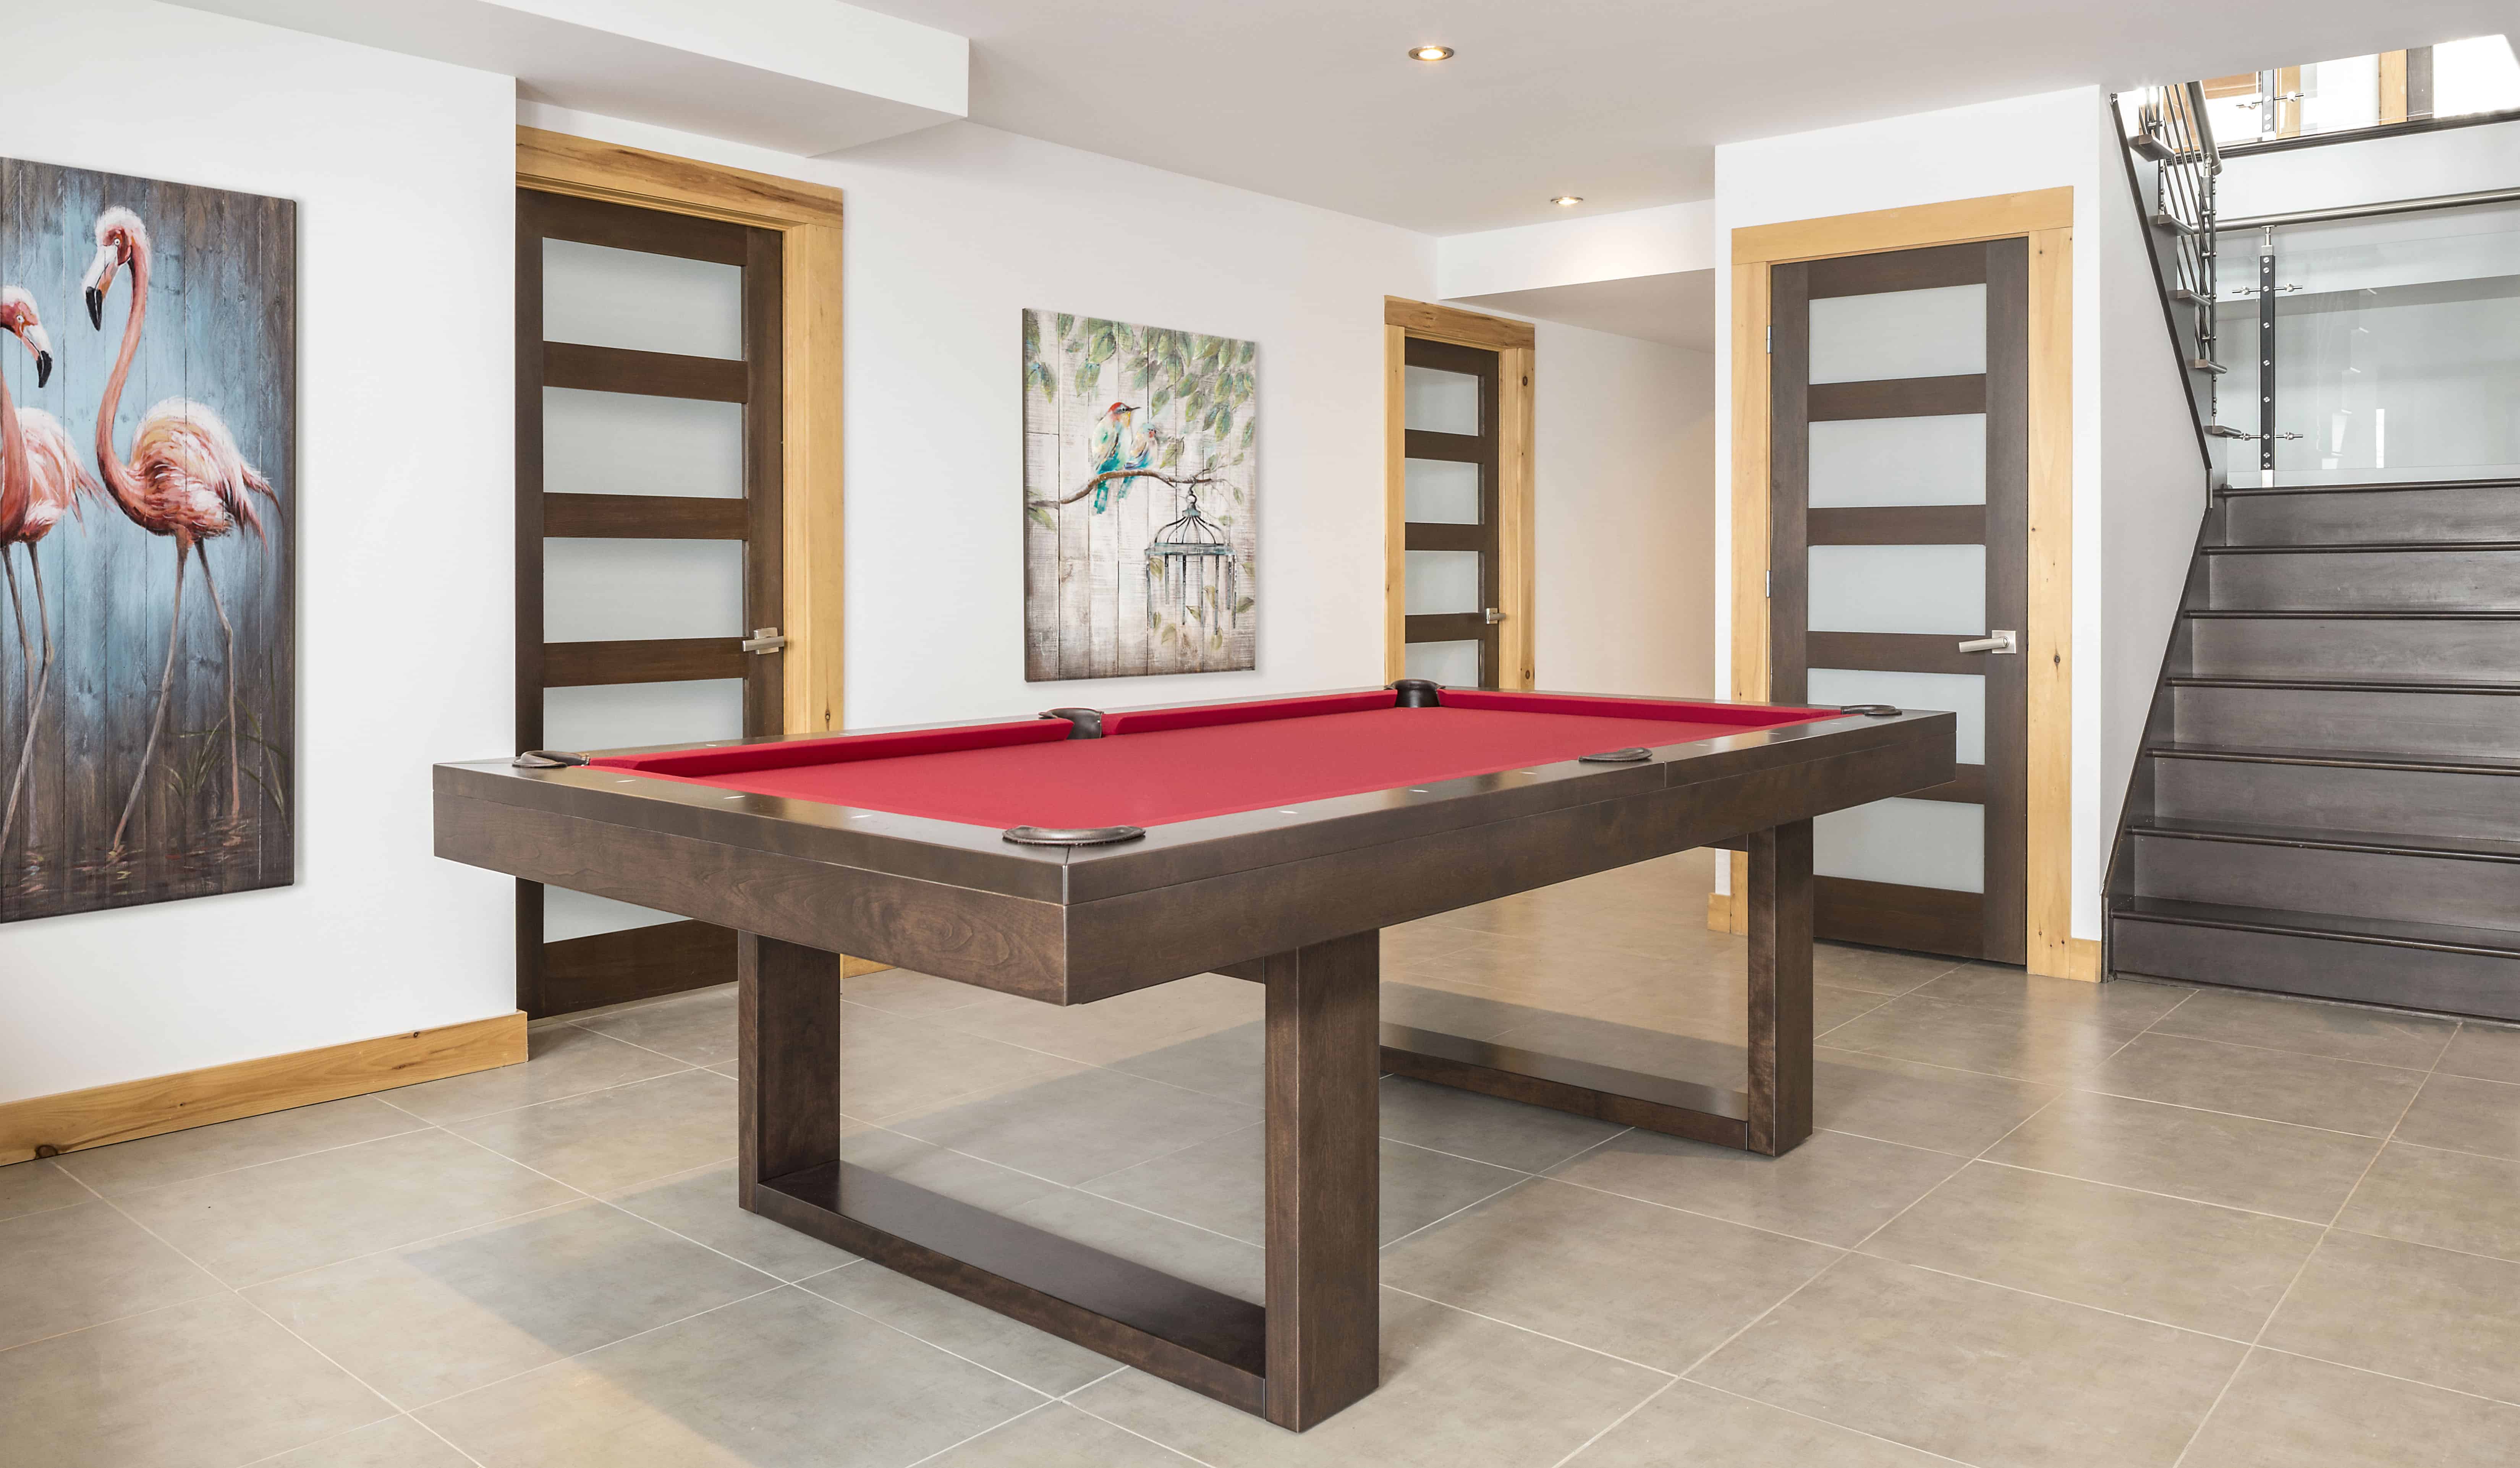 Red and Wood Pool Table